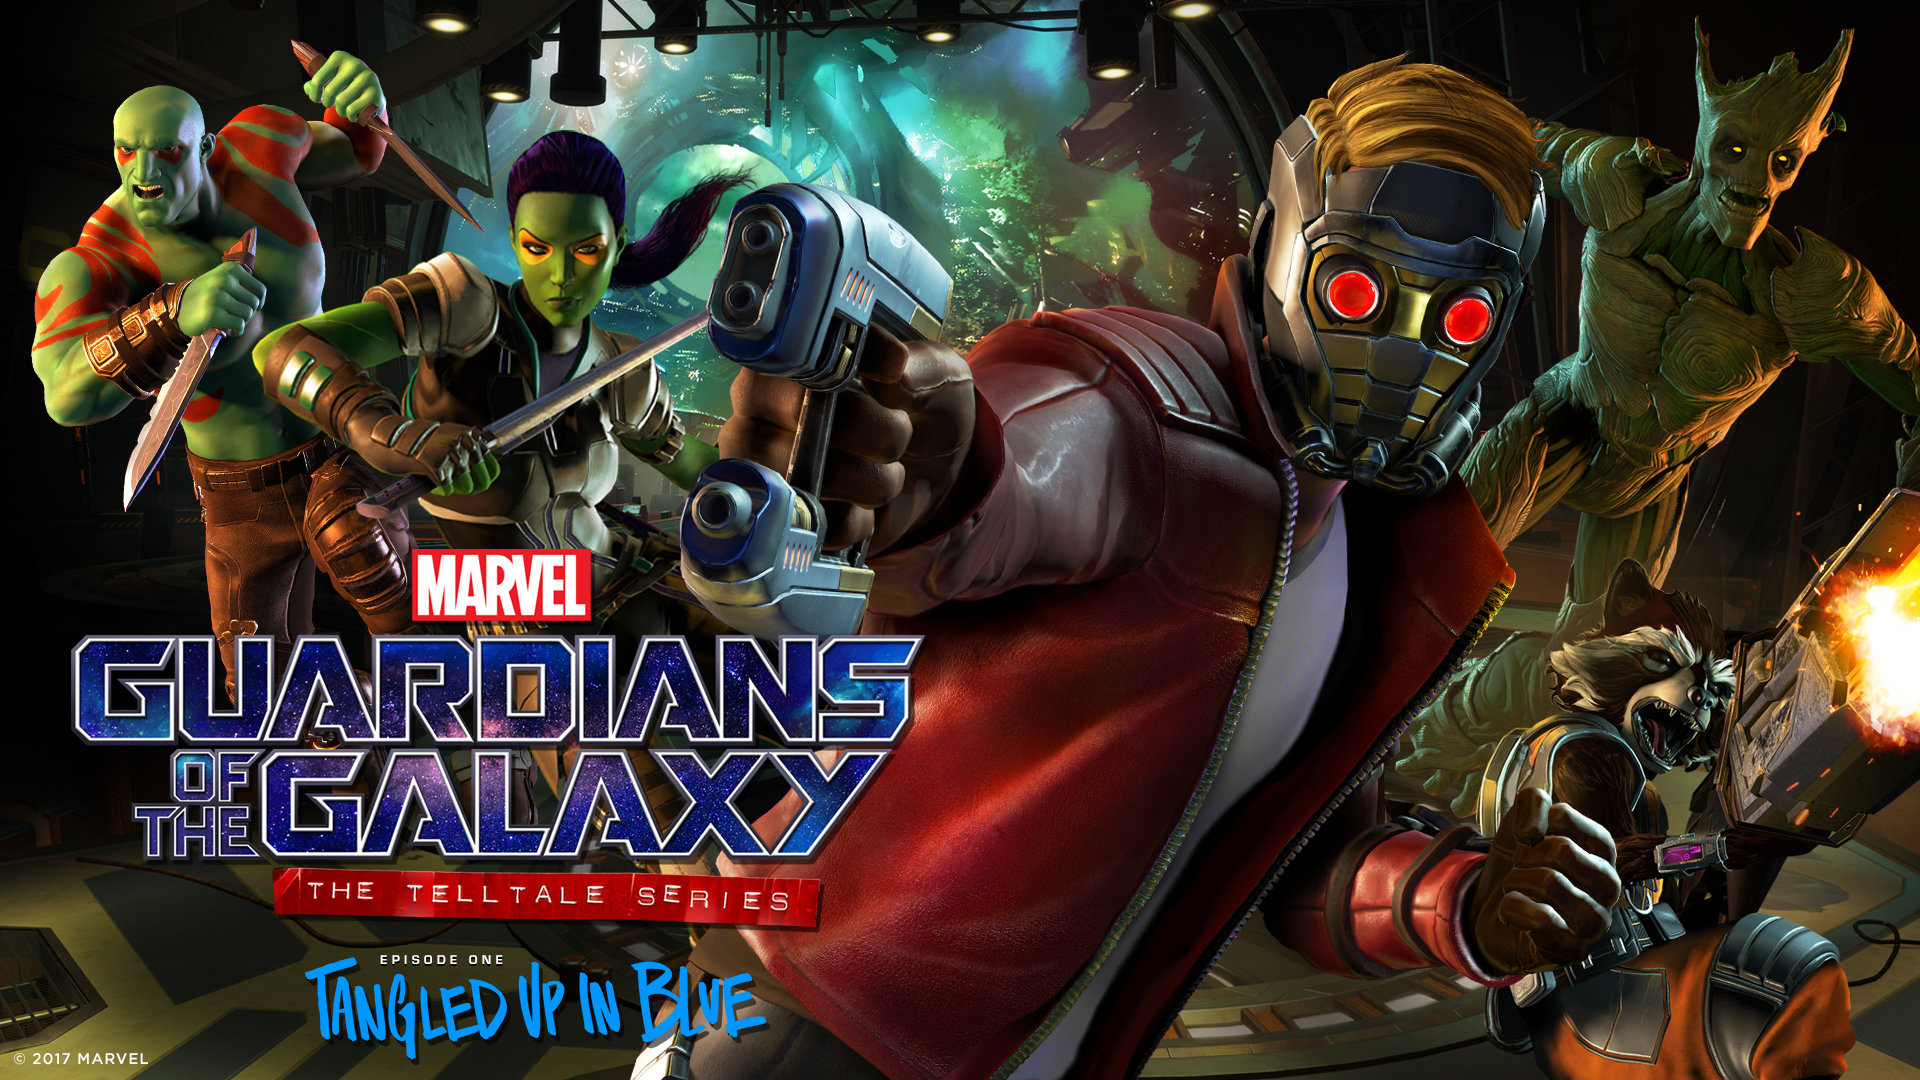 Guardians of the Galaxy The Telltale Series Artwork 002